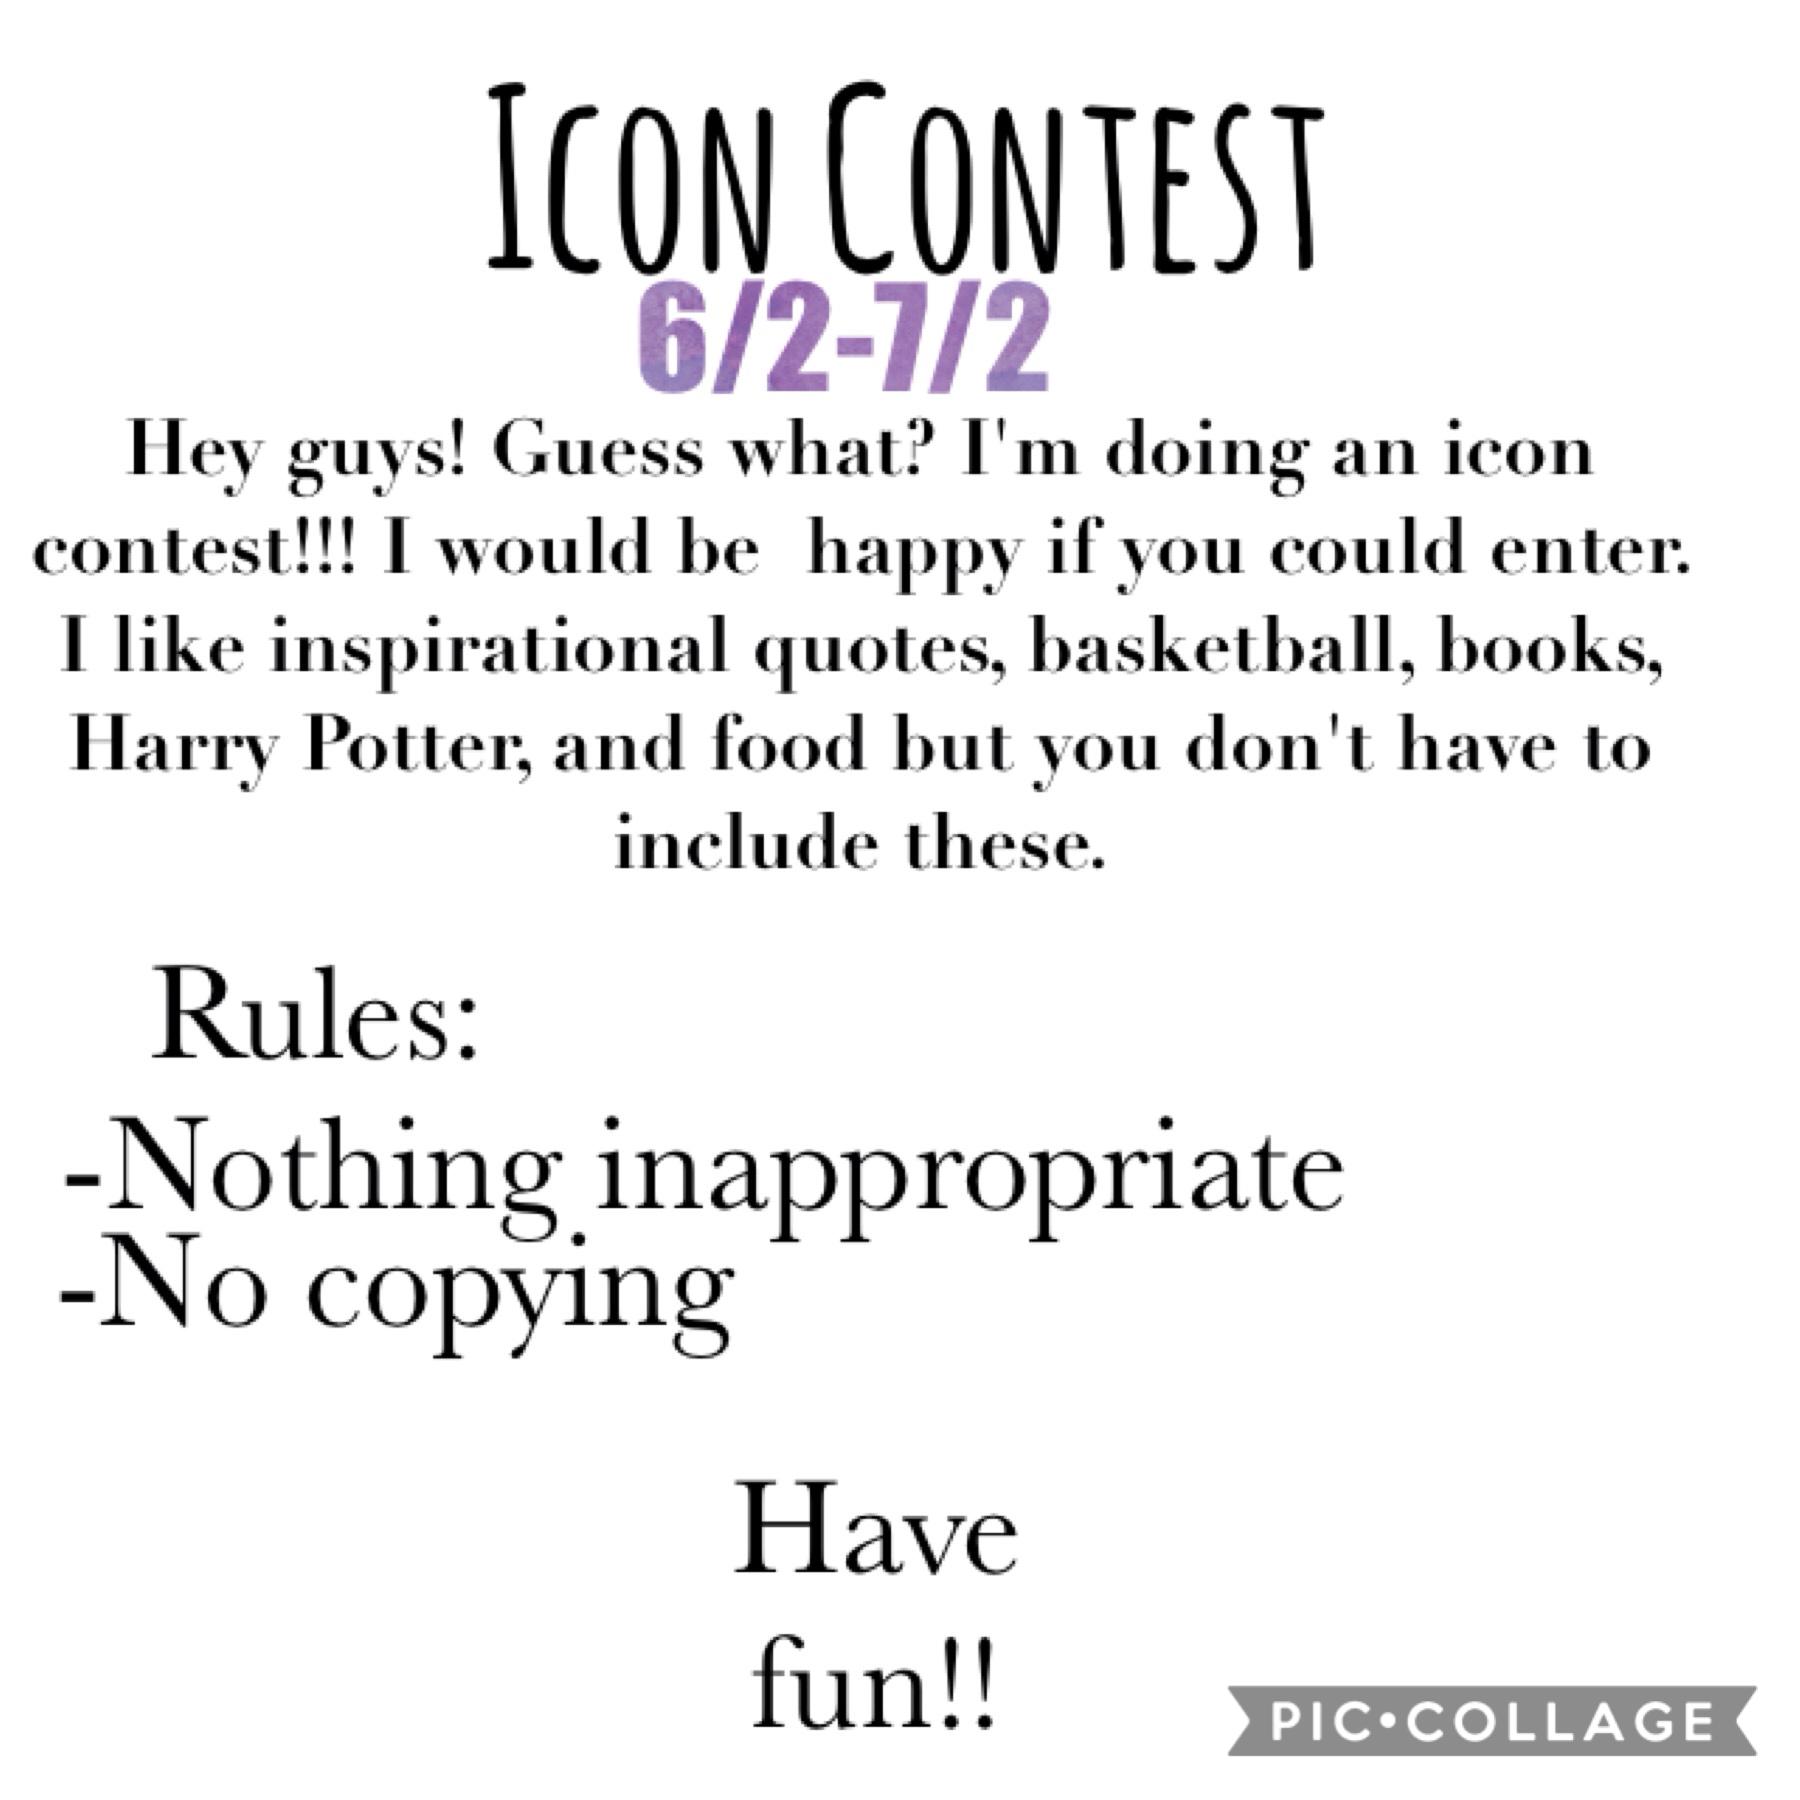 Yes it's true! Please enter. You have a whole month to do this !!!! 


Have fun!!!